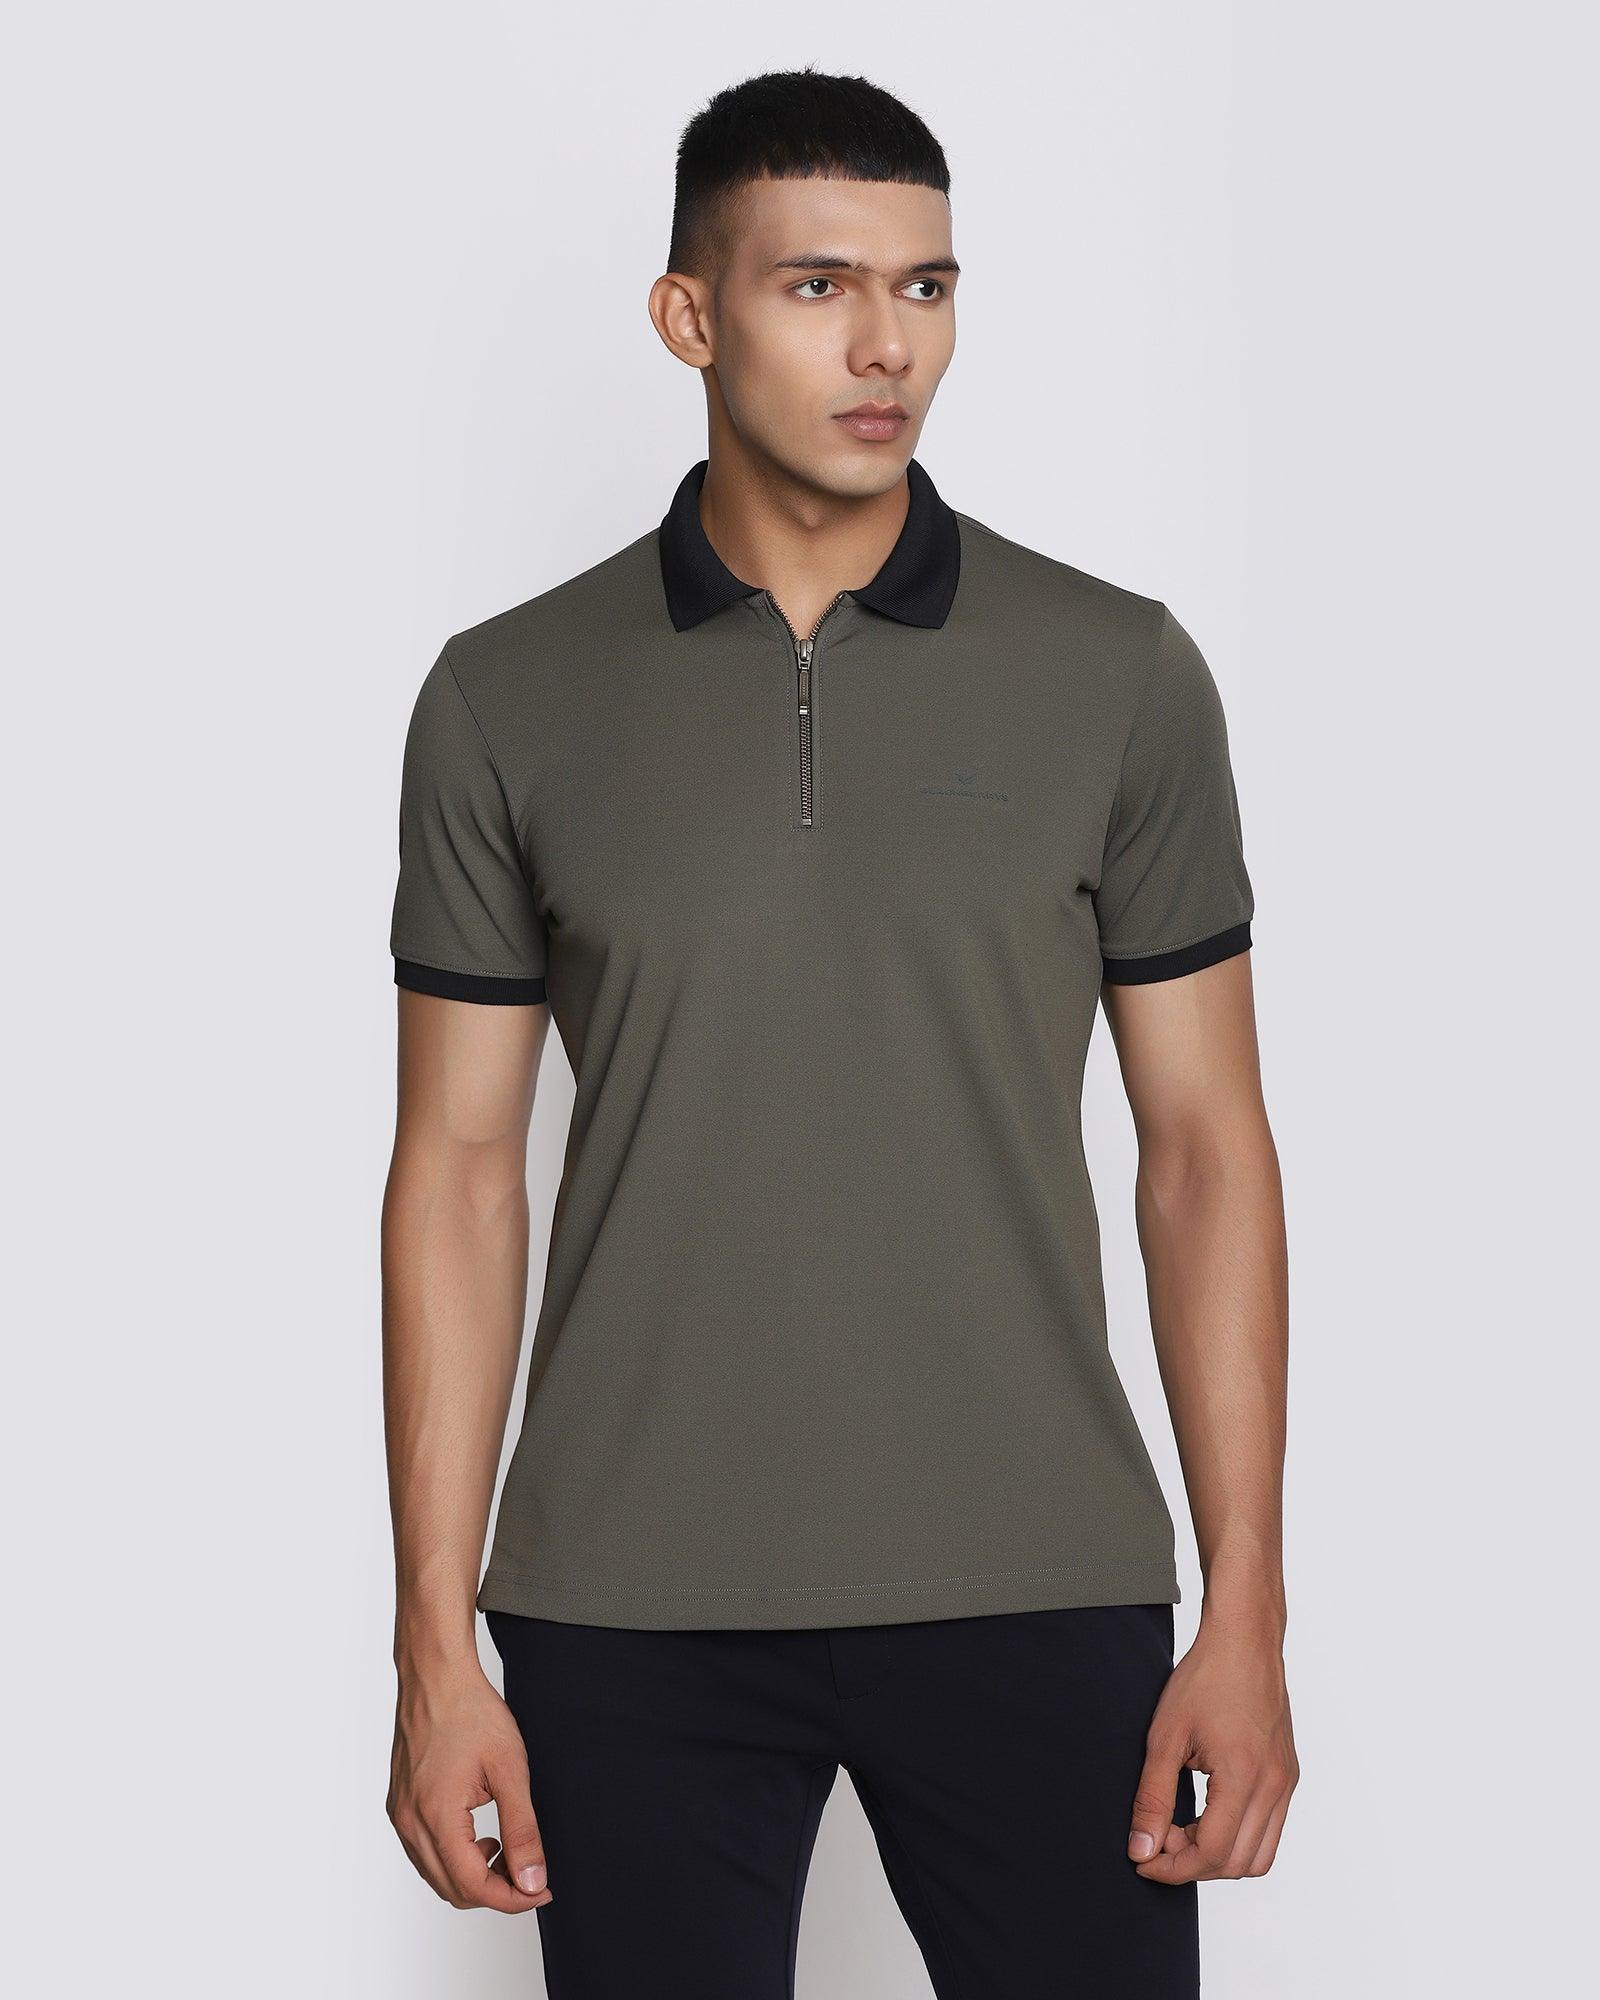 TechPro Polo Olive Solid T Shirt - Elite